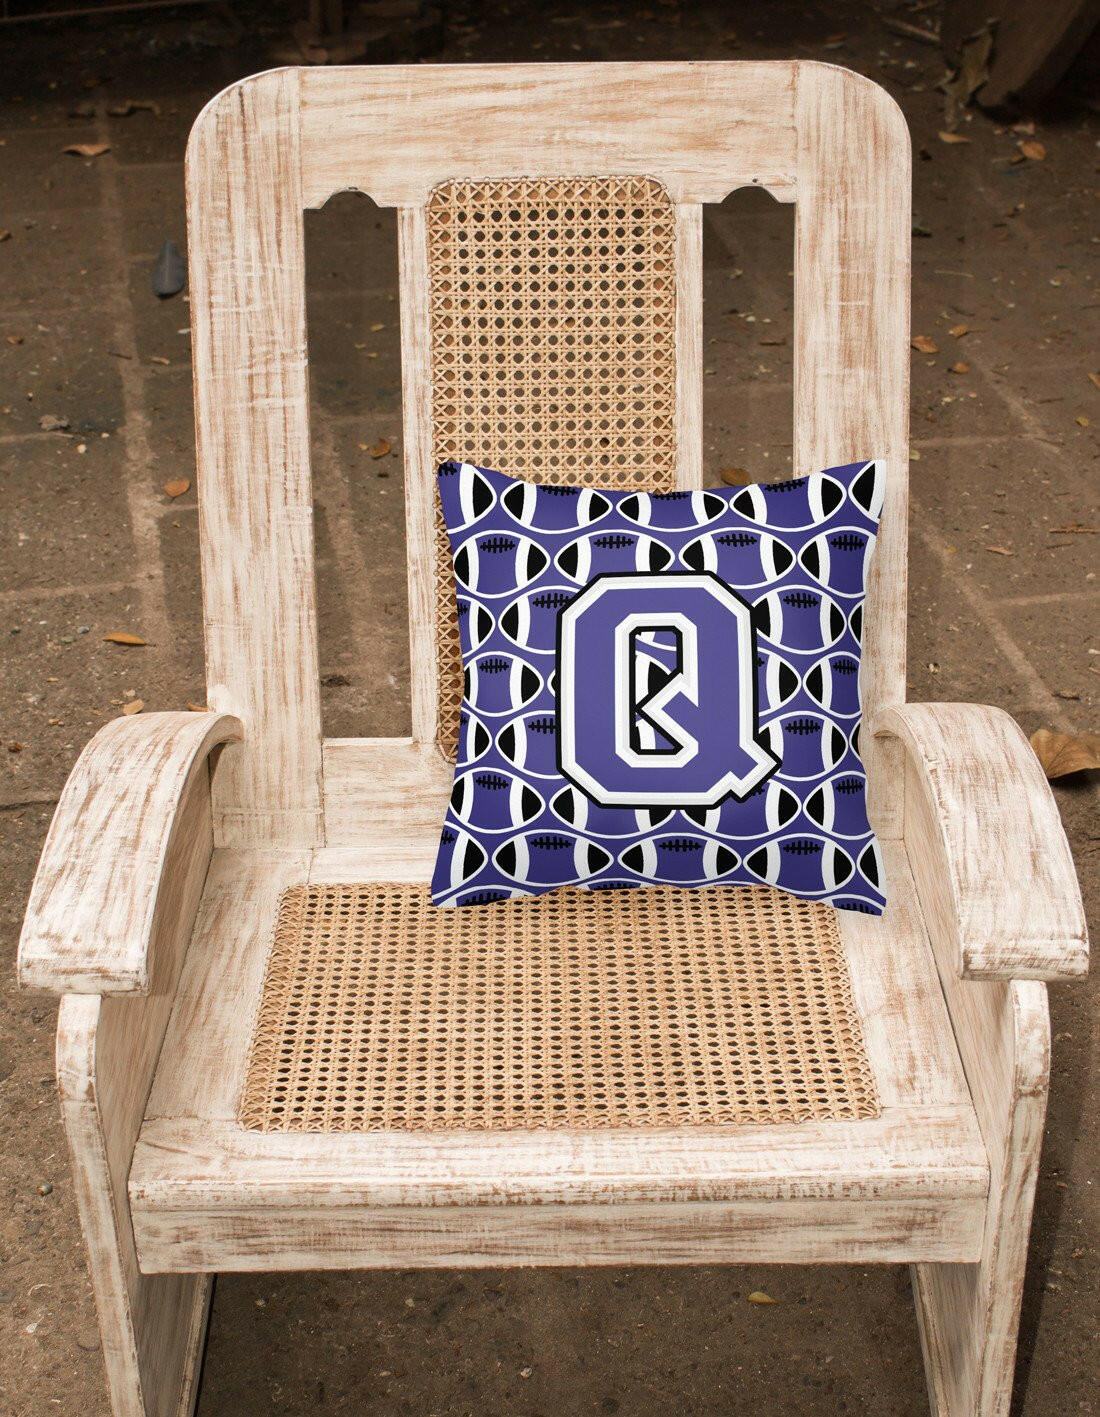 Letter Q Football Purple and White Fabric Decorative Pillow CJ1068-QPW1414 by Caroline's Treasures